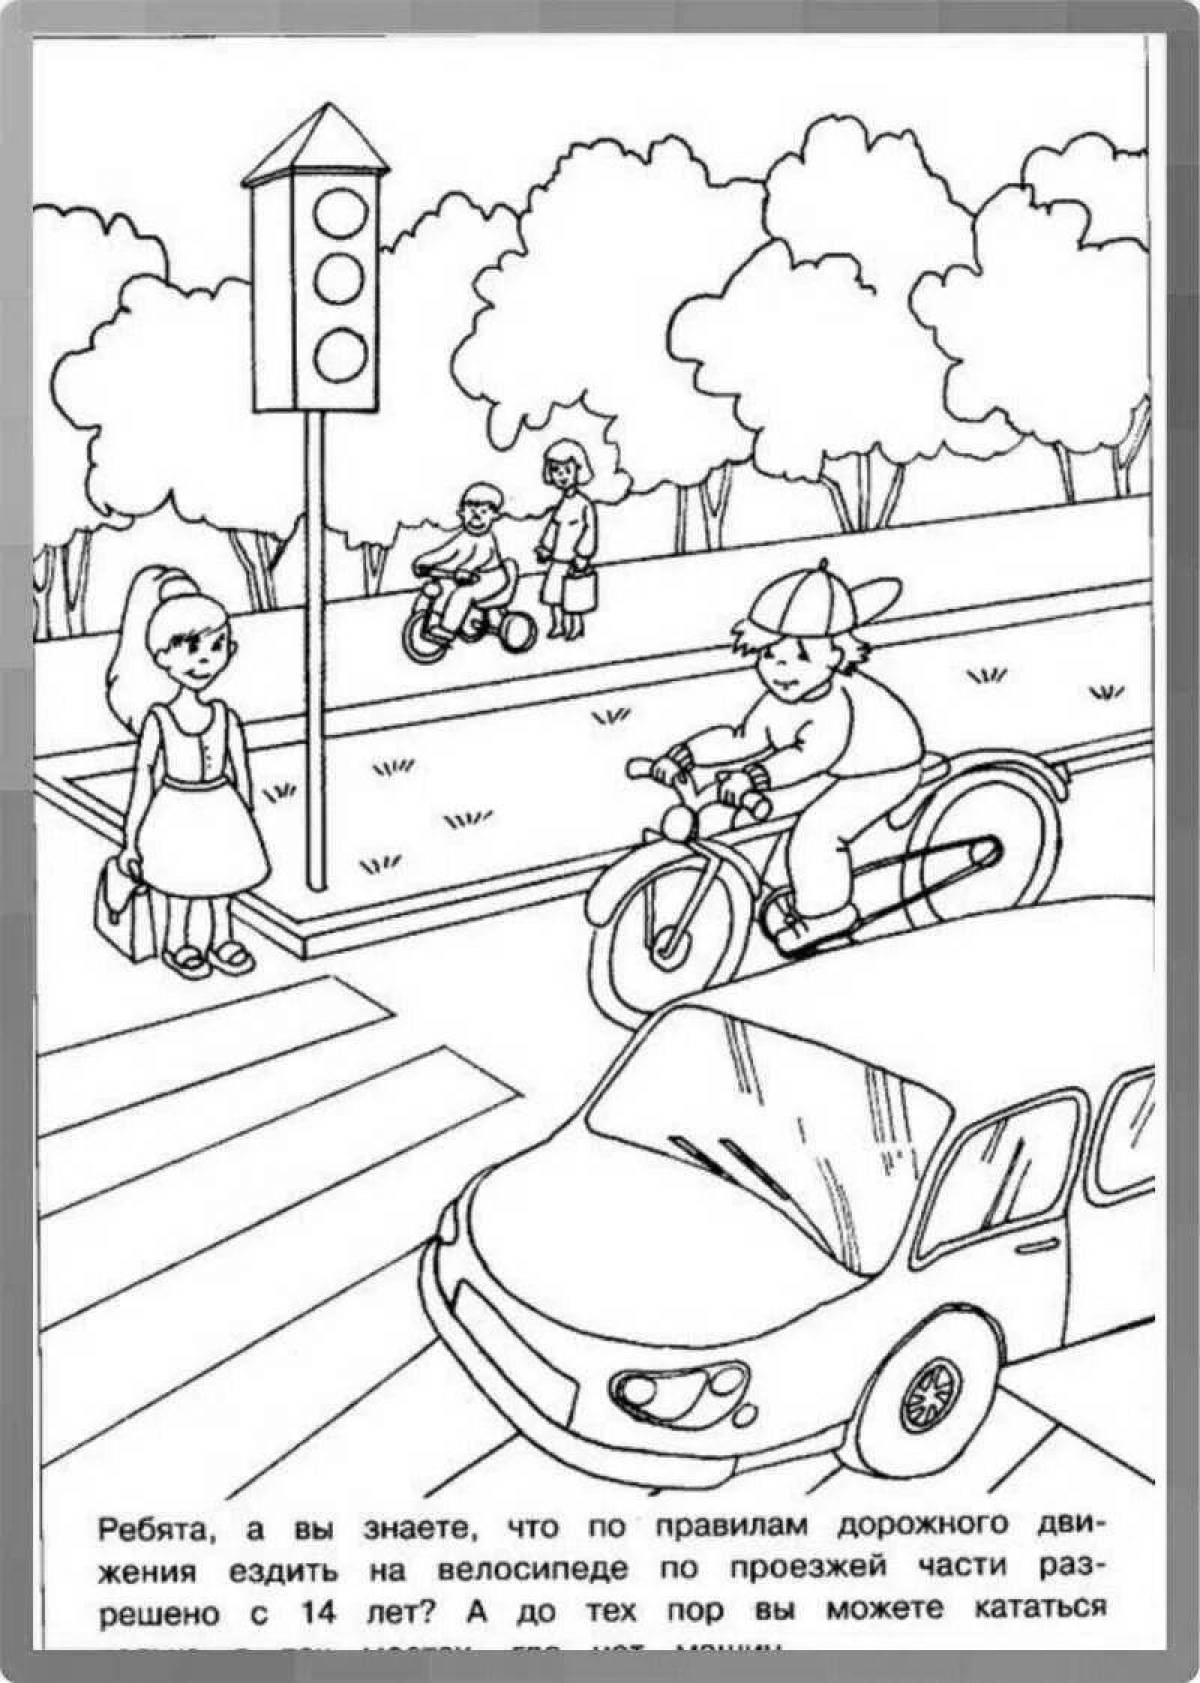 Outstanding road coloring book for kids